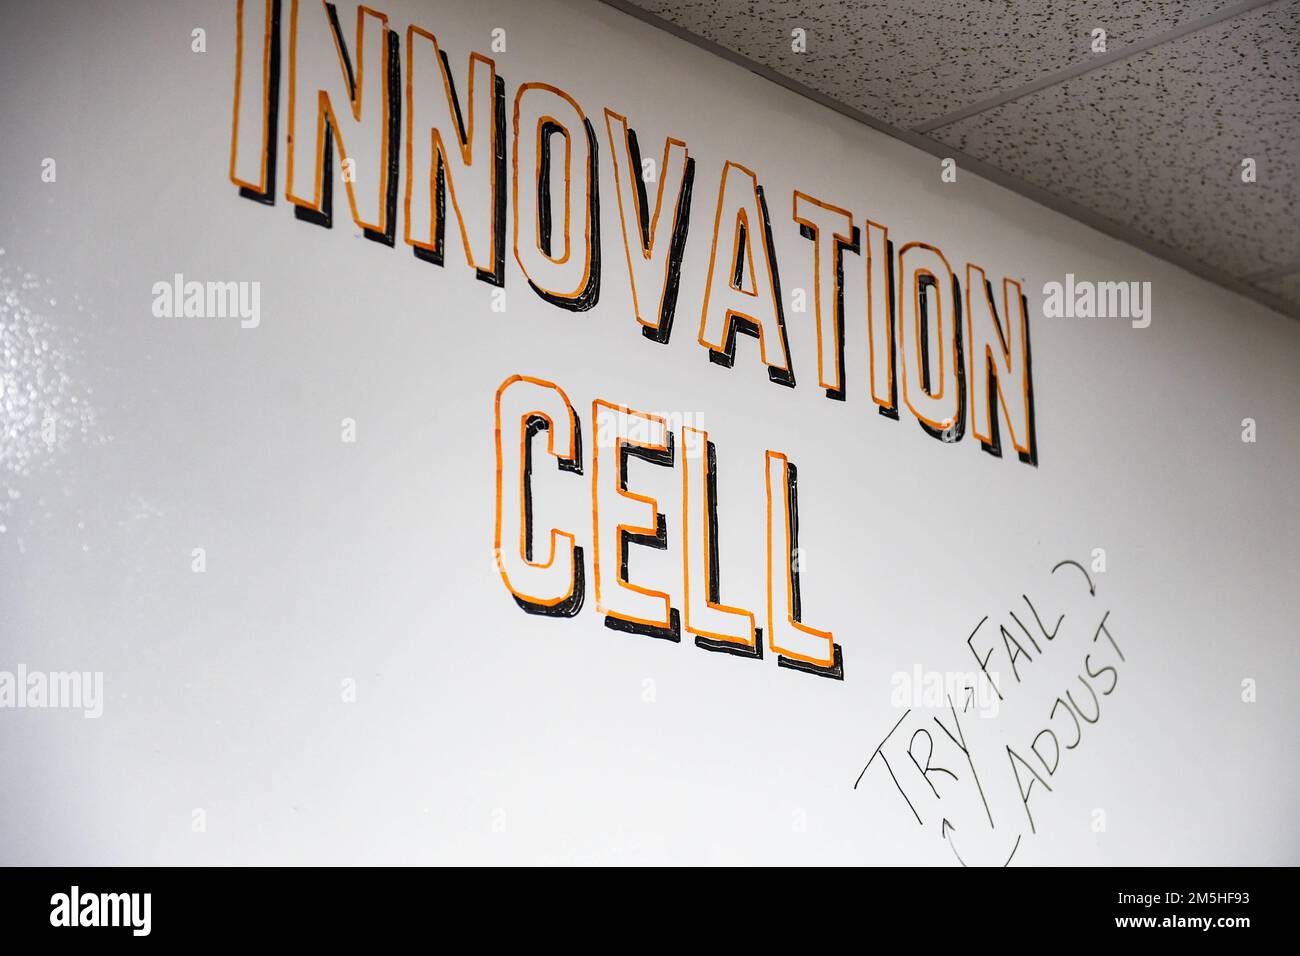 The Business Innovation Cell’s motto and title is displayed on their dry-erase wall in the 23rd Contracting Squadron at Moody Air Force Base, Georgia, March 17, 2022. The members of the cell wrote ideas and statistical information on the dry-erase wall to track and plan for future improvements in the 23rd CONS. Stock Photo